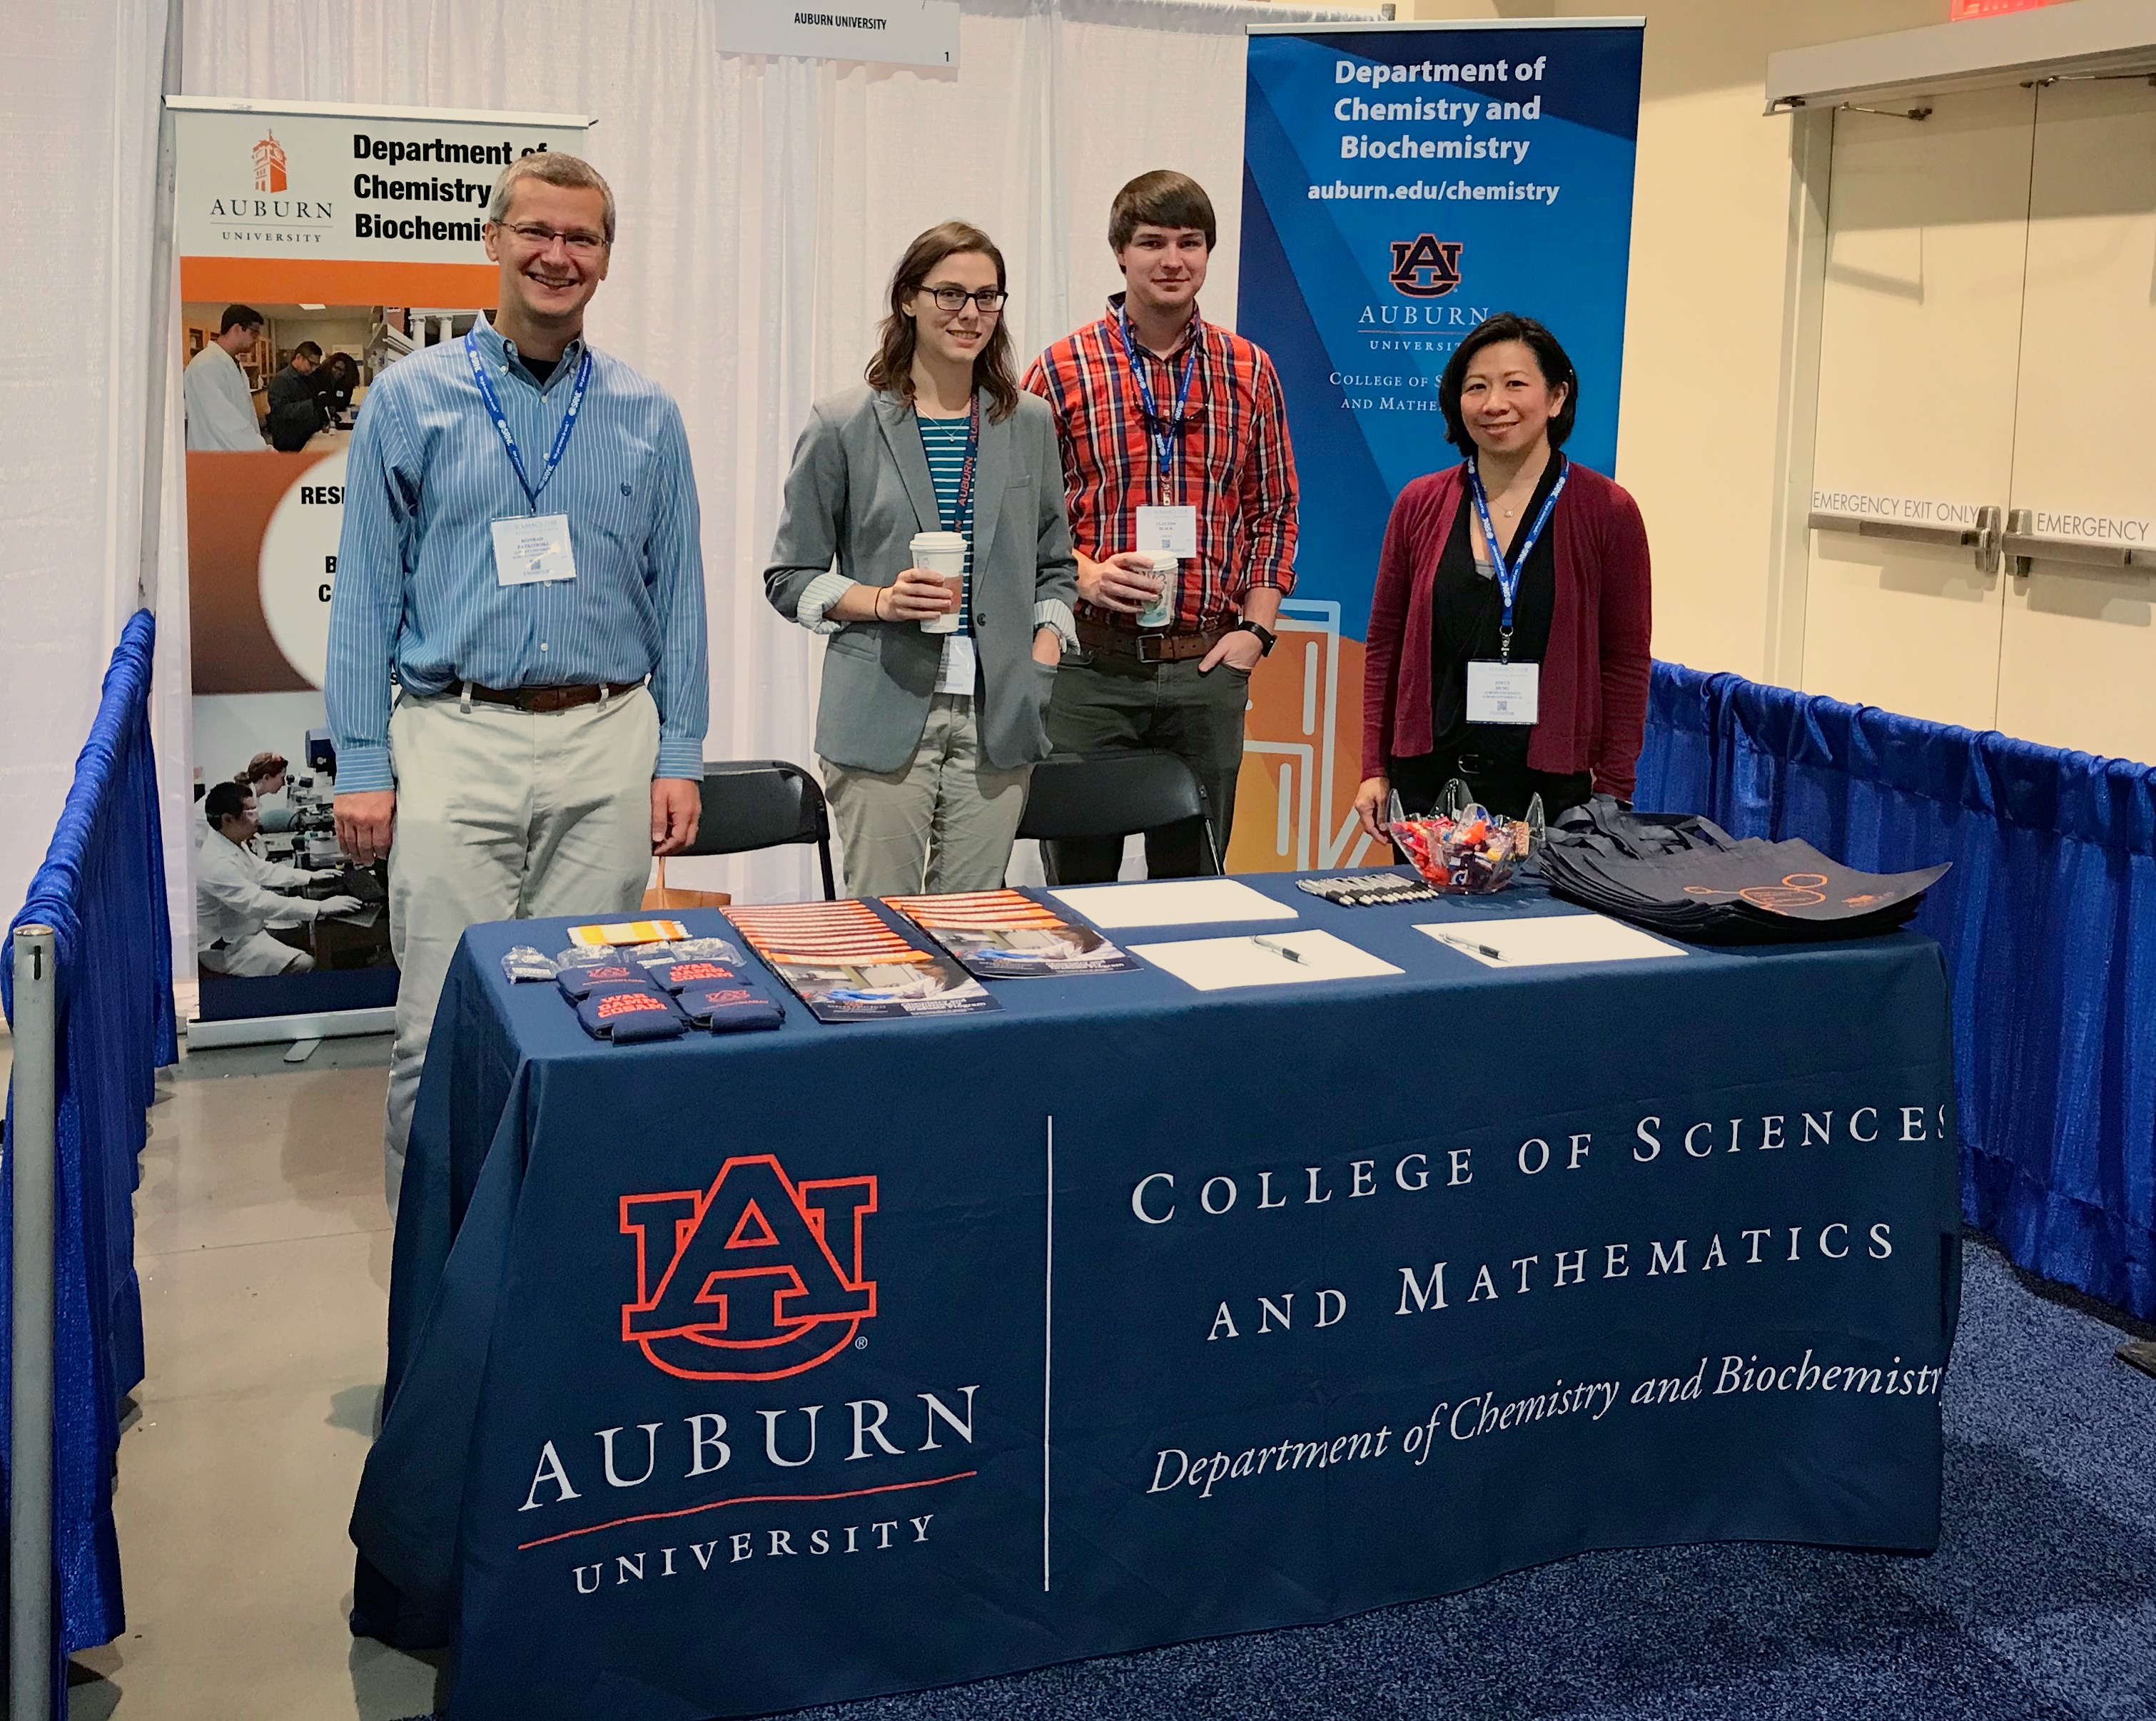 Pictured left to right: Associate Professor Dr. Konrad Patkowski, Graduate Student Julie Niklas, Graduate Student Clay Black and Director of Instructional and Research Laboratories Dr. Joyce Hung.